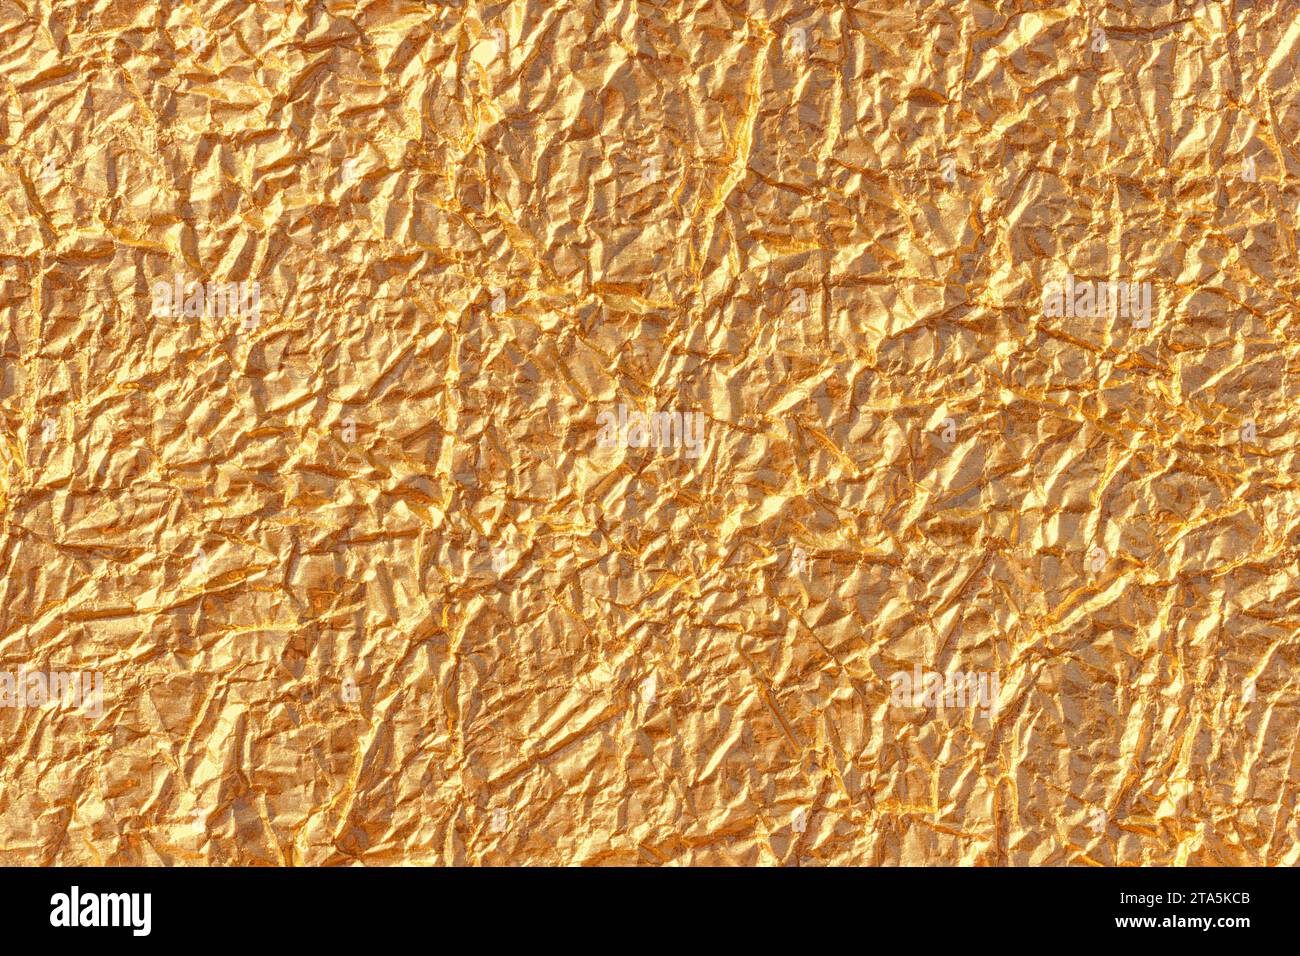 Golden Foil Background. Abstract Wrinkled Texture Pattern. Metallic Wrap Paper Texture Or Backdrop. Stock Photo